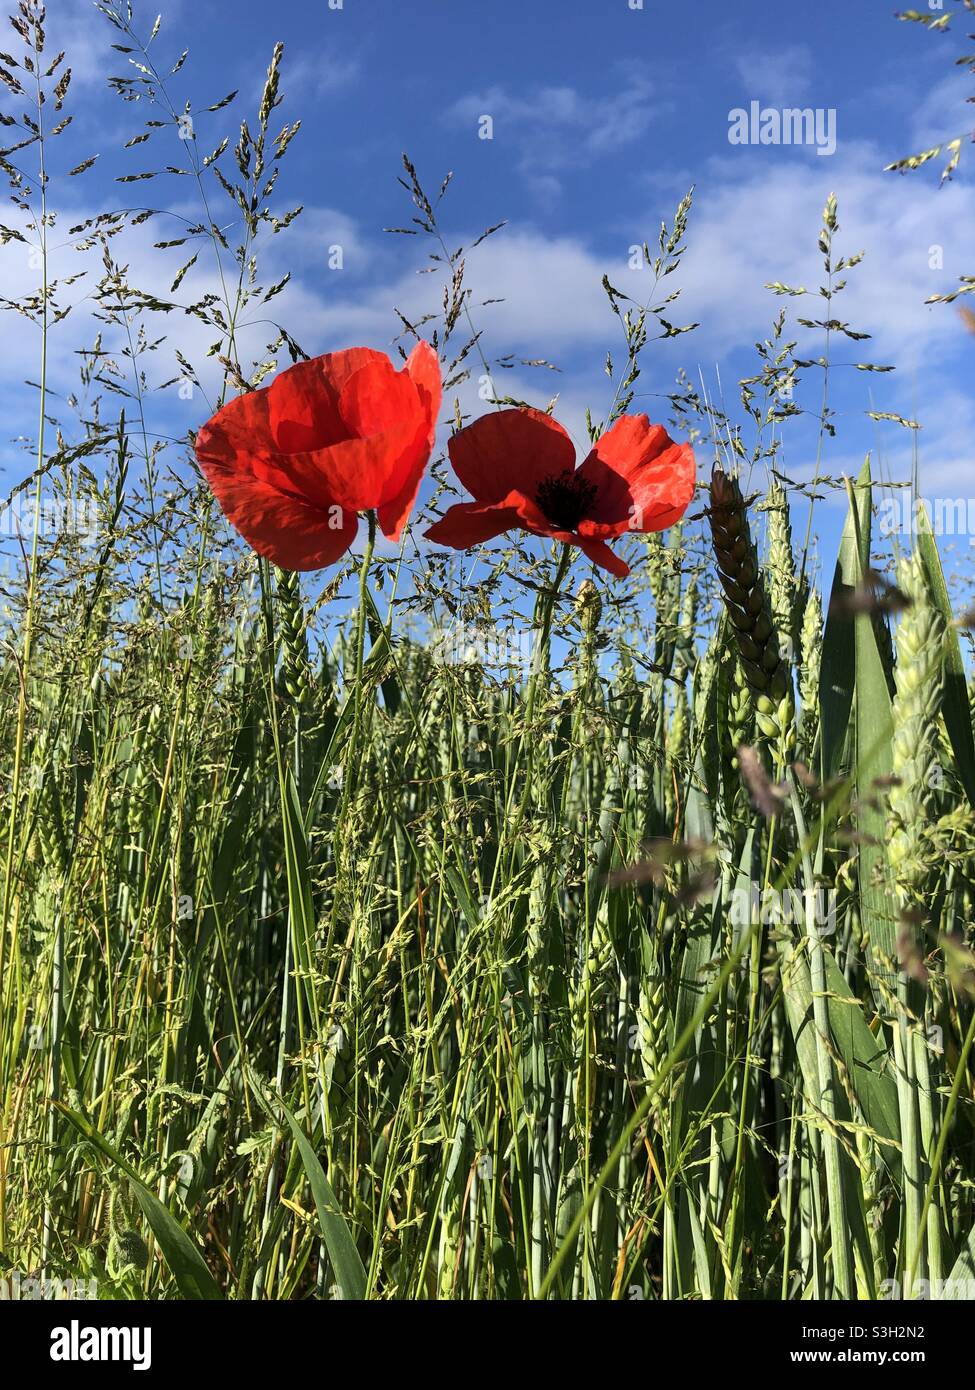 Two field poppies in flower in a field of wheat in summer, United Kingdom Stock Photo